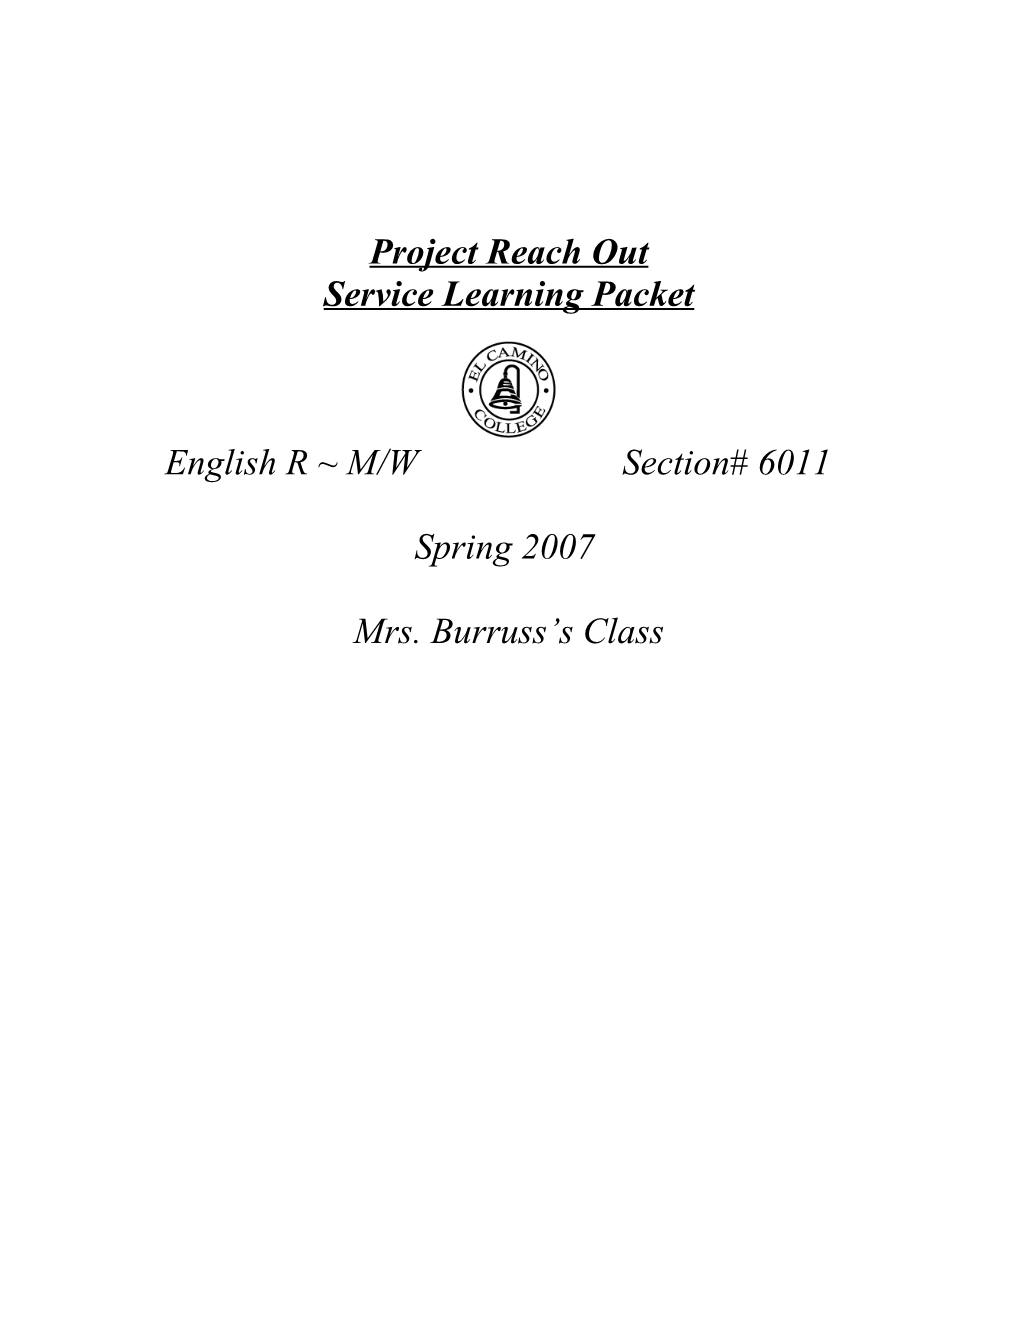 Service Learning Packet